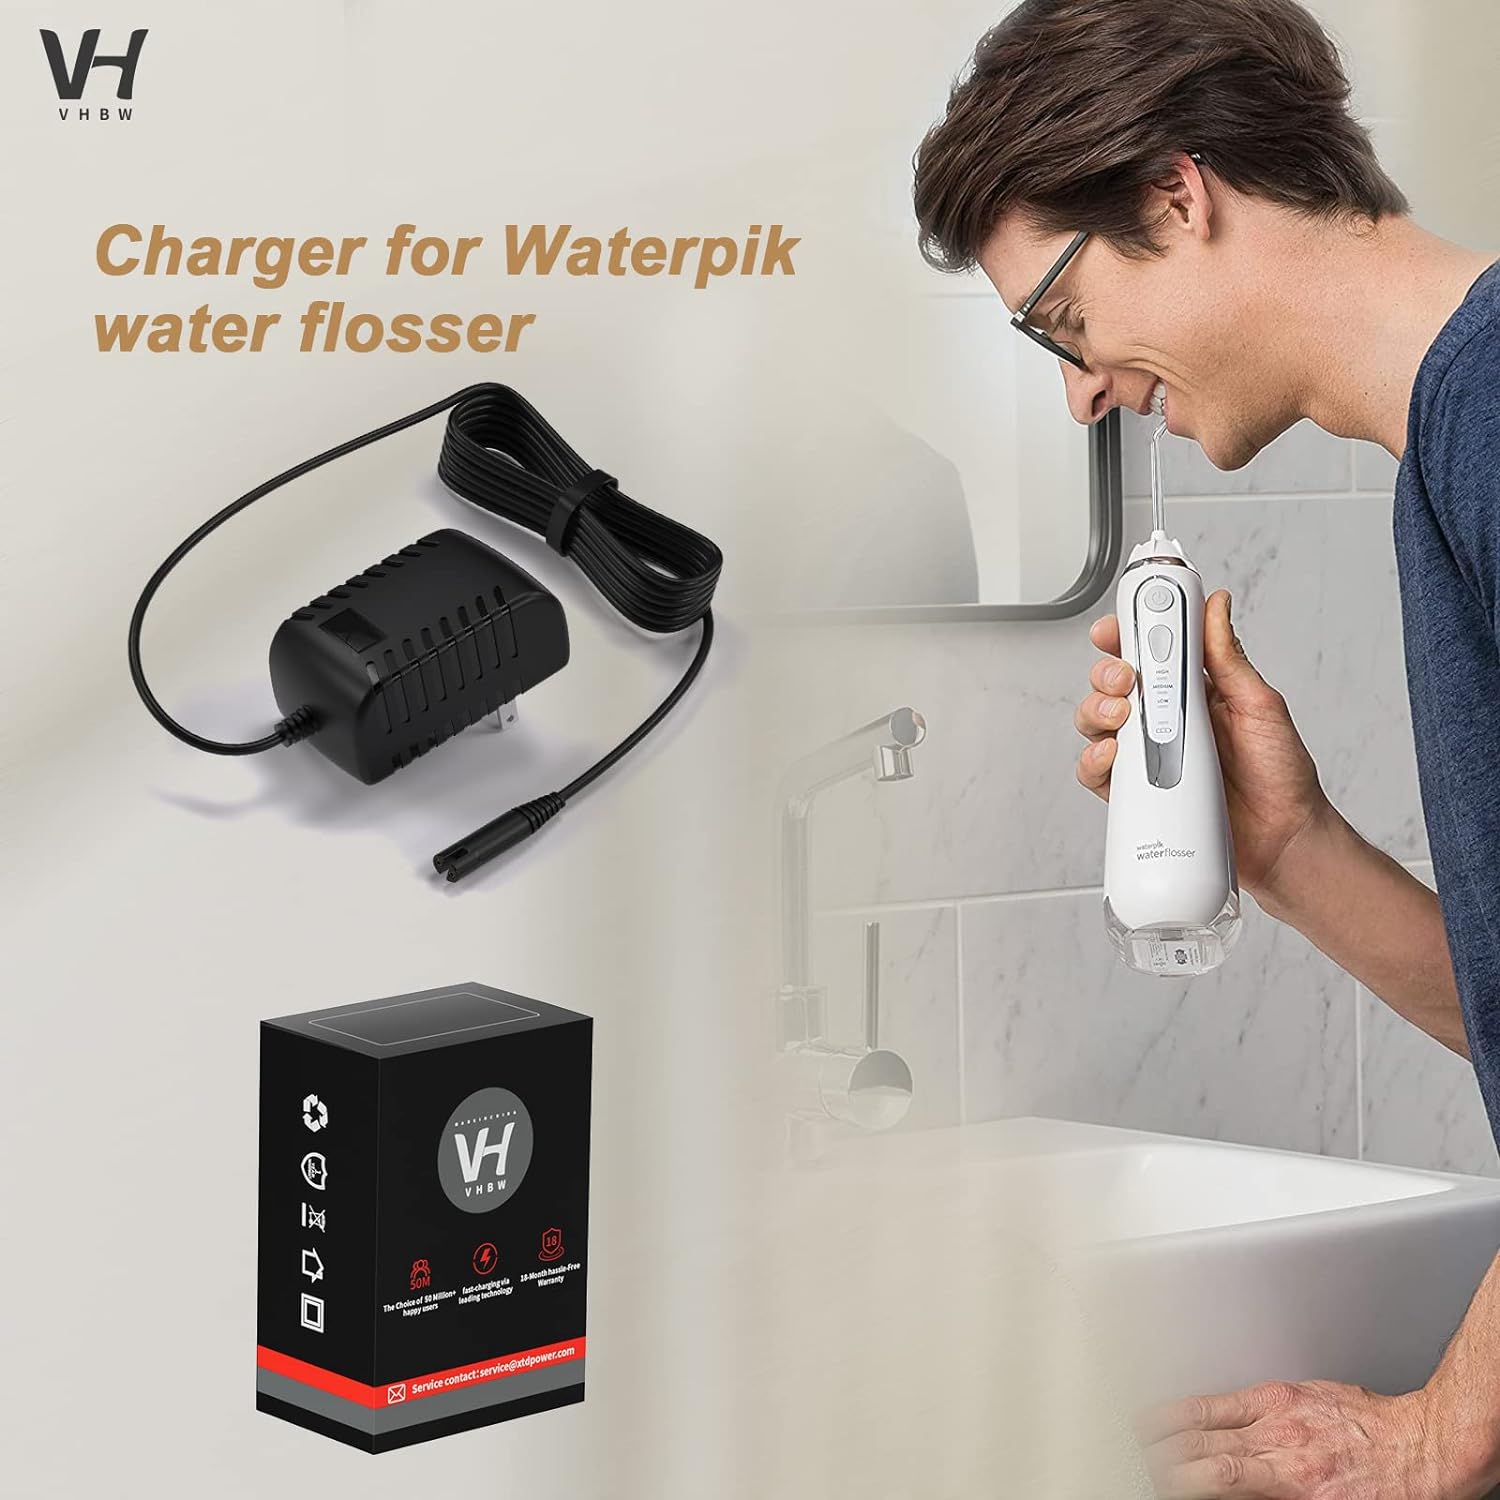 Replacement for Waterpik Charger Compatible with WP360 WP360W WP462 WP462W WP450 WP450W Power Cord 【Two Prong Adapter】